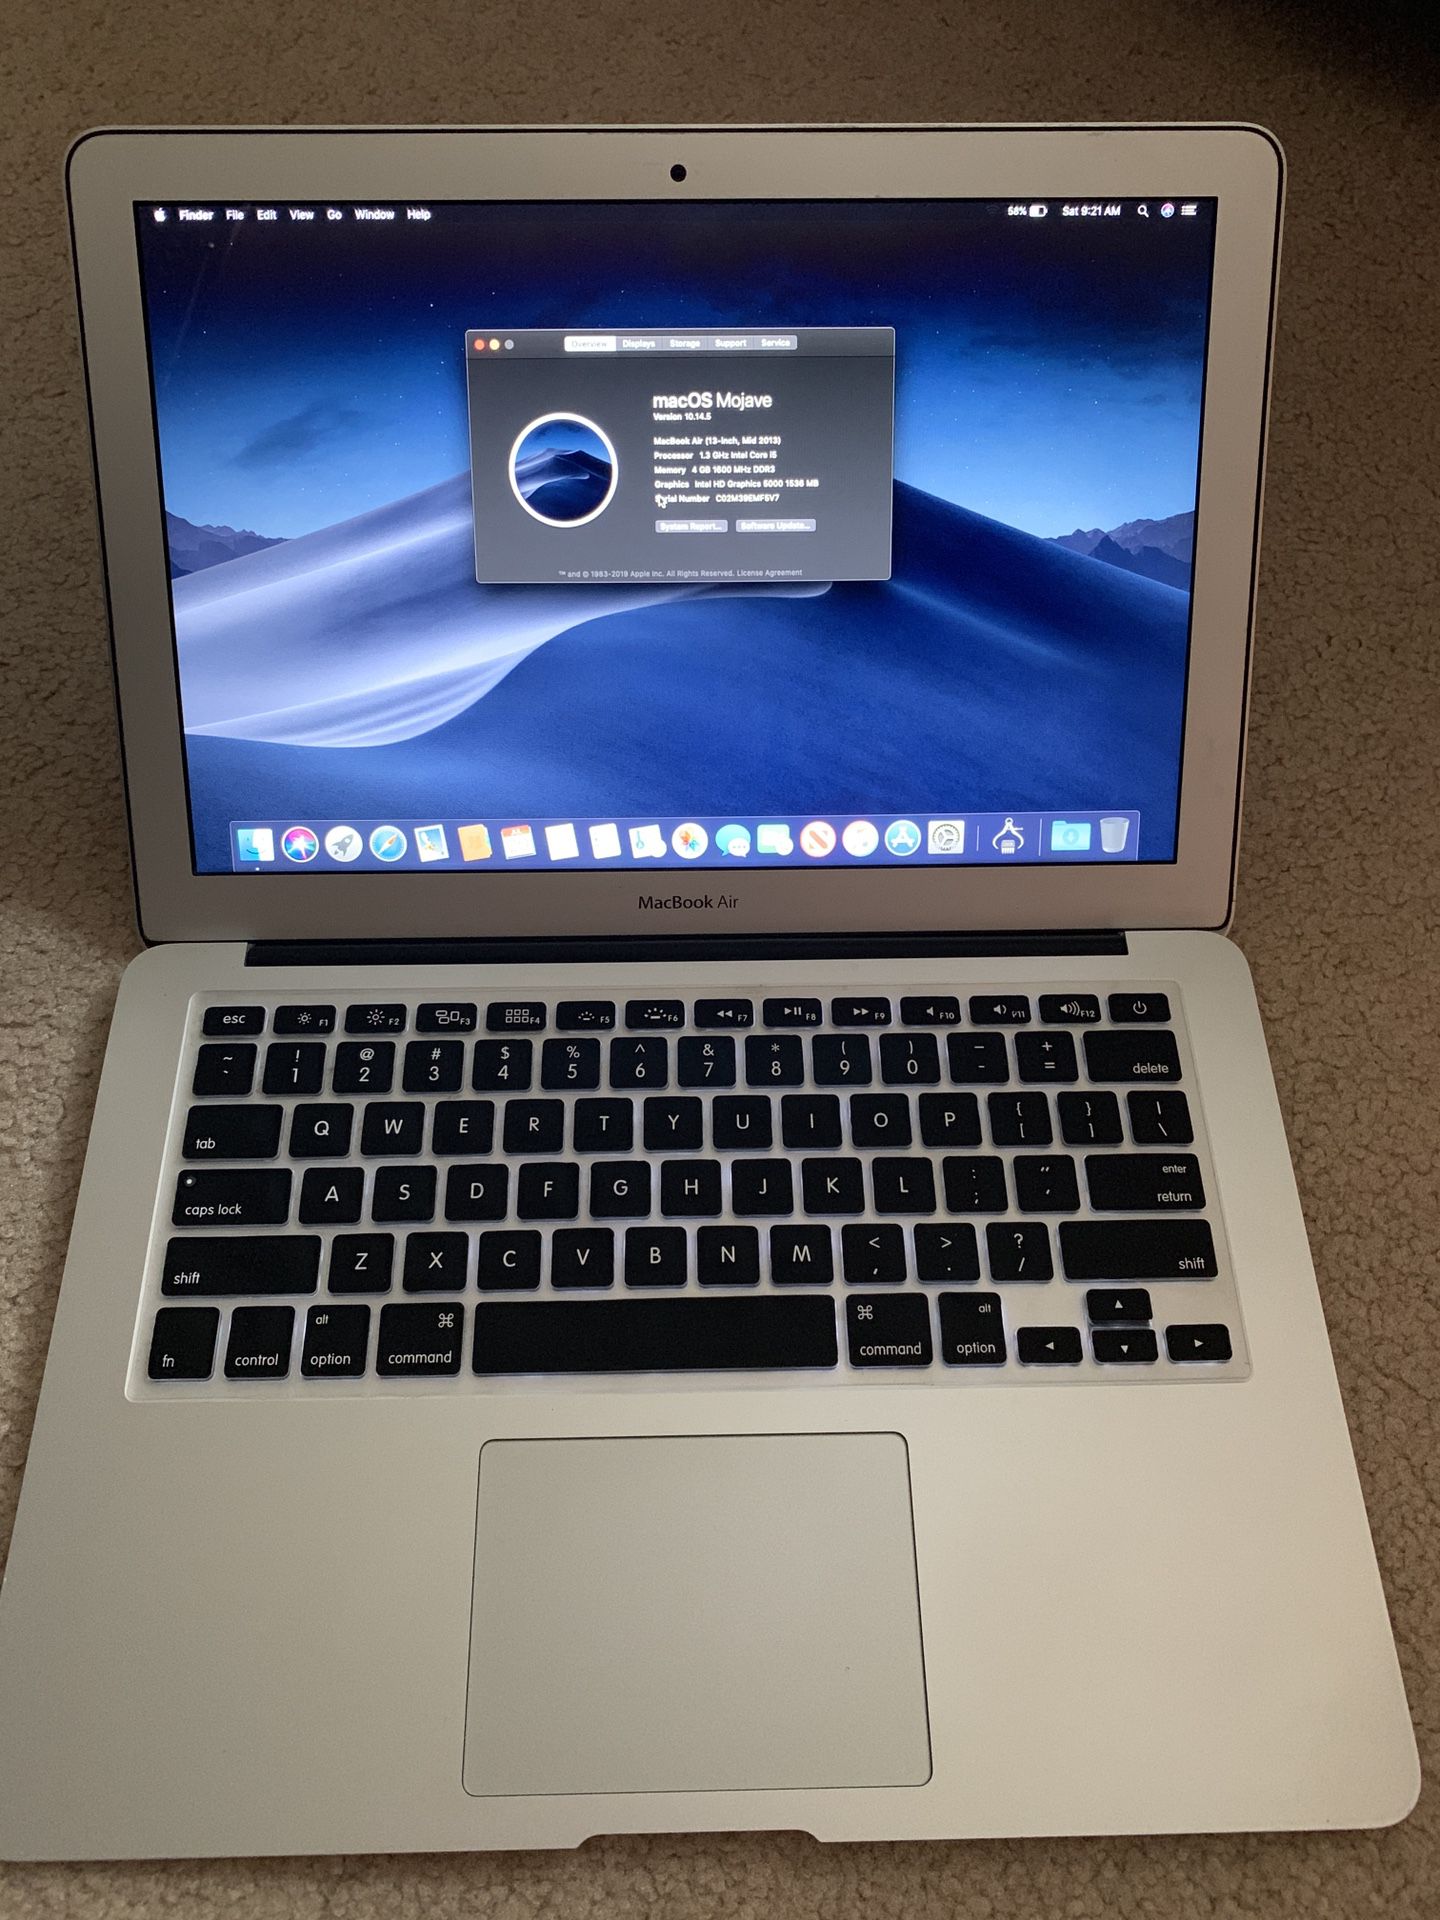 MacBook Air 13” i5/4/128gb with Microsoft office 2016